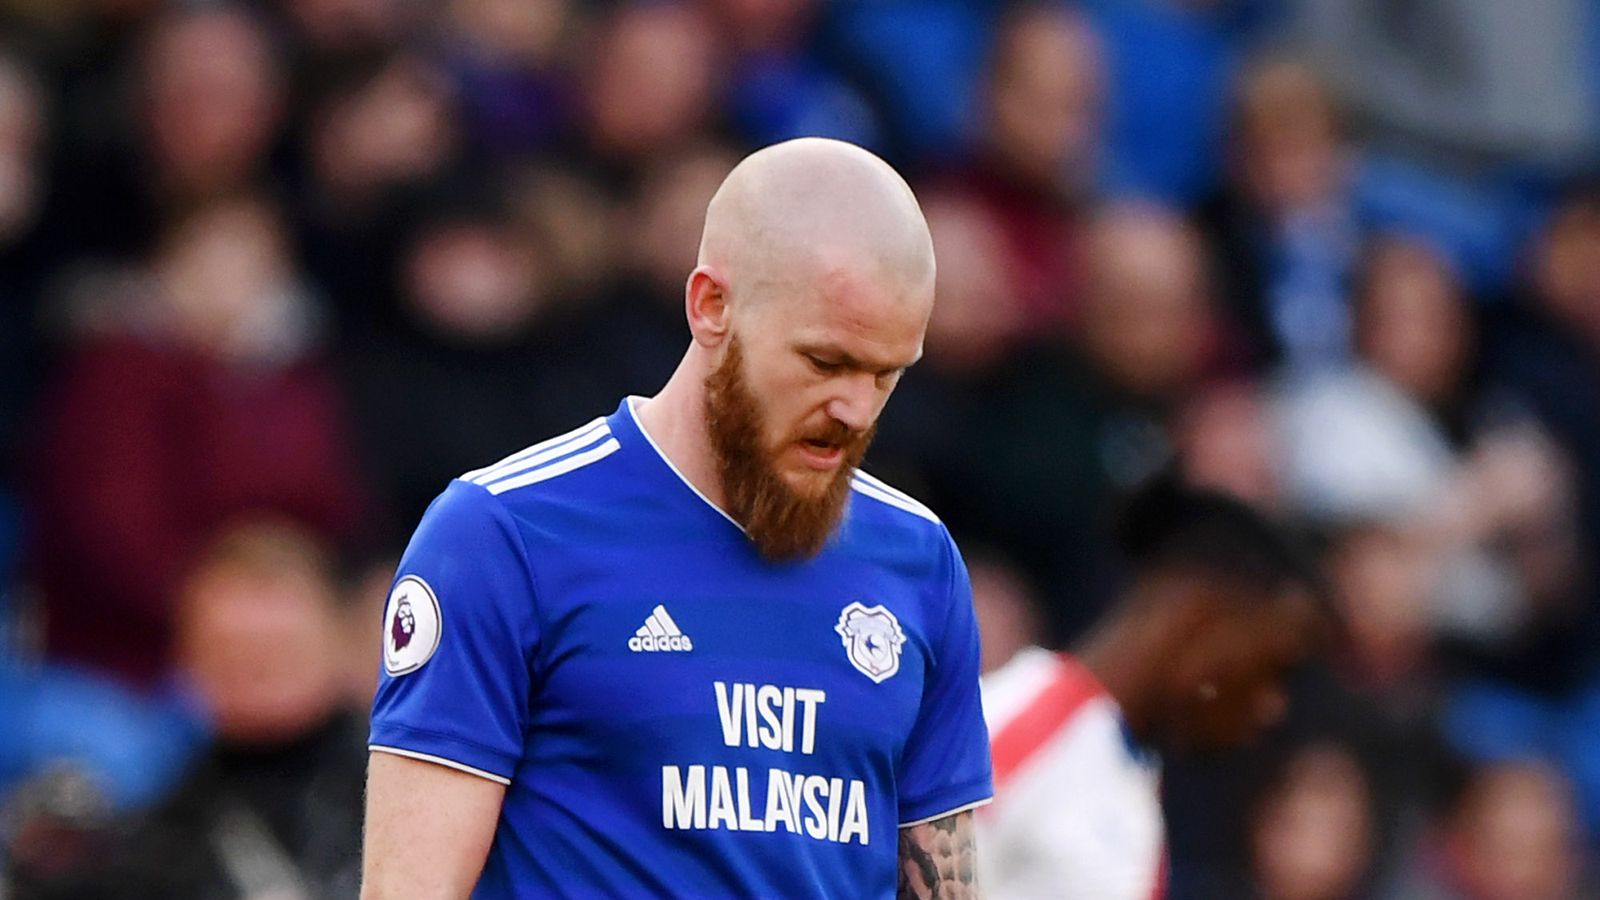 Predicted Premier League table: Cardiff City doomed to relegation